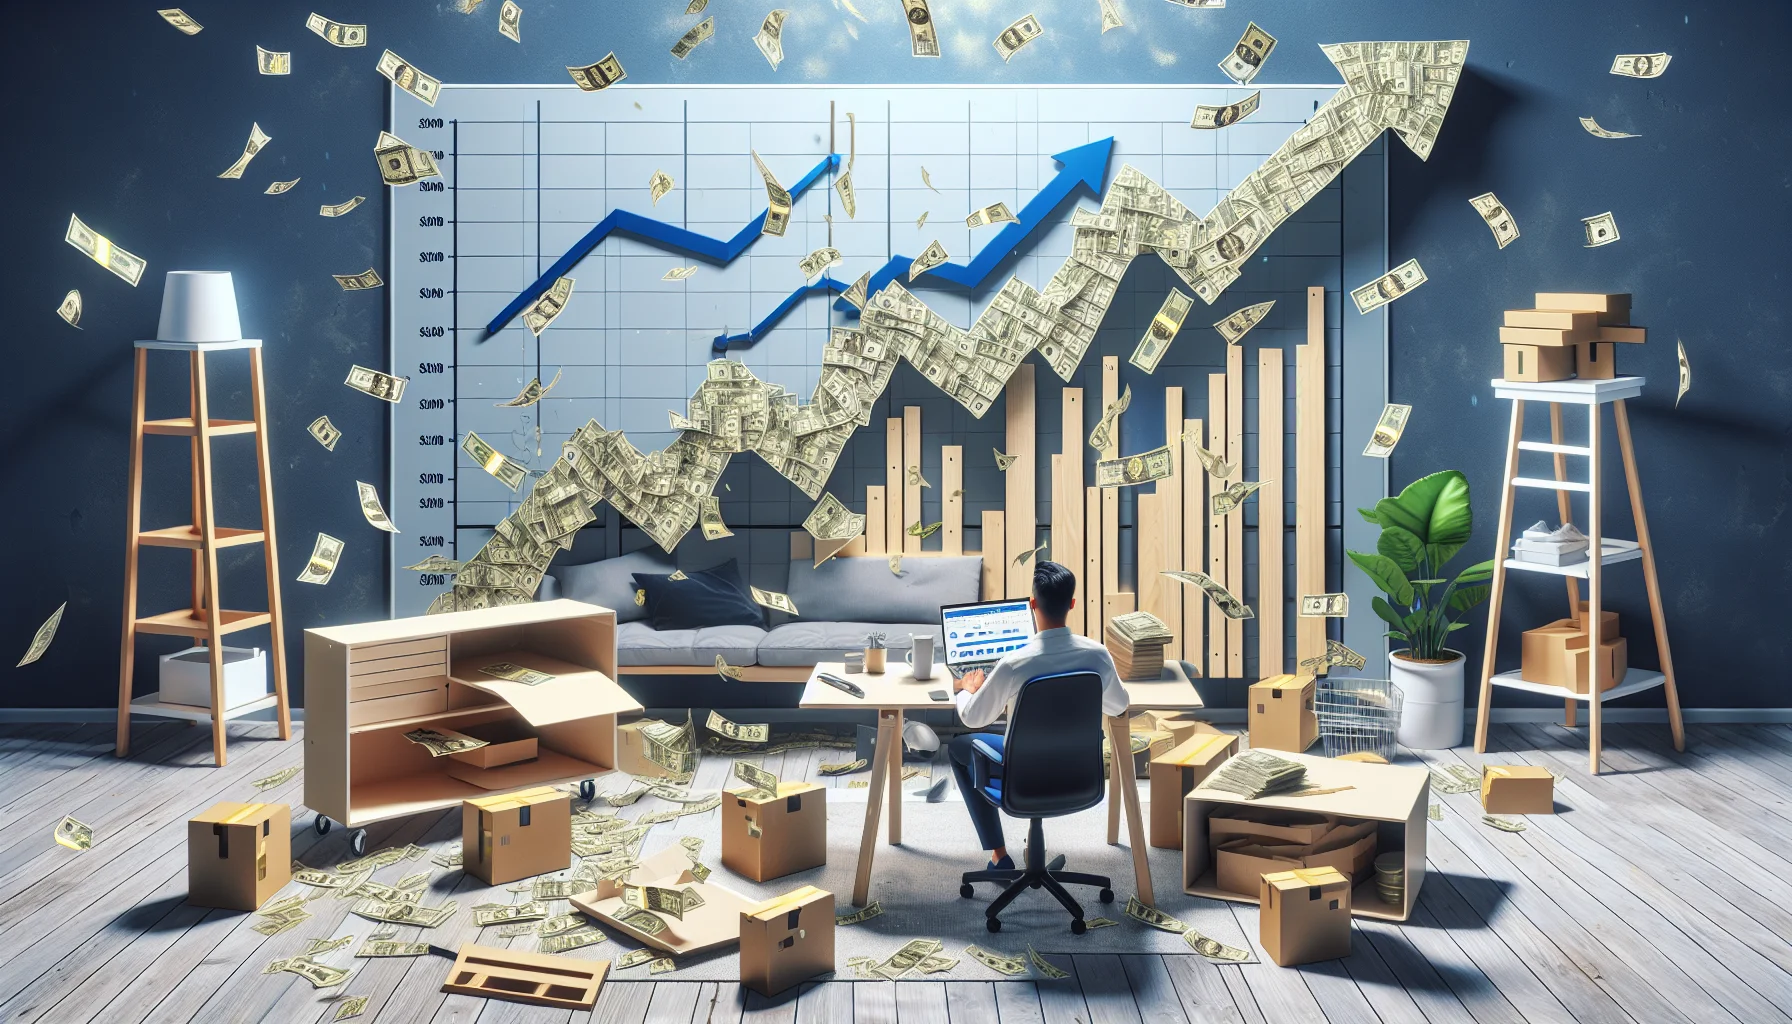 Generate a humorous yet realistic illustration showcasing an affiliate program of a generic but recognizable flat-pack furniture retailer, similar to IKEA. The scene artistically captures a person of Hispanic descent, sitting at a well-organized home office with a laptop, showing earnings shooting up on a graph on the screen related to the online affiliate program. Banknotes are falling like leaves around the room, and flat-pack furniture items are whimsically coming to life, assembling themselves. The scenario enhances the allure of earning money online in an engaging and captivating manner.